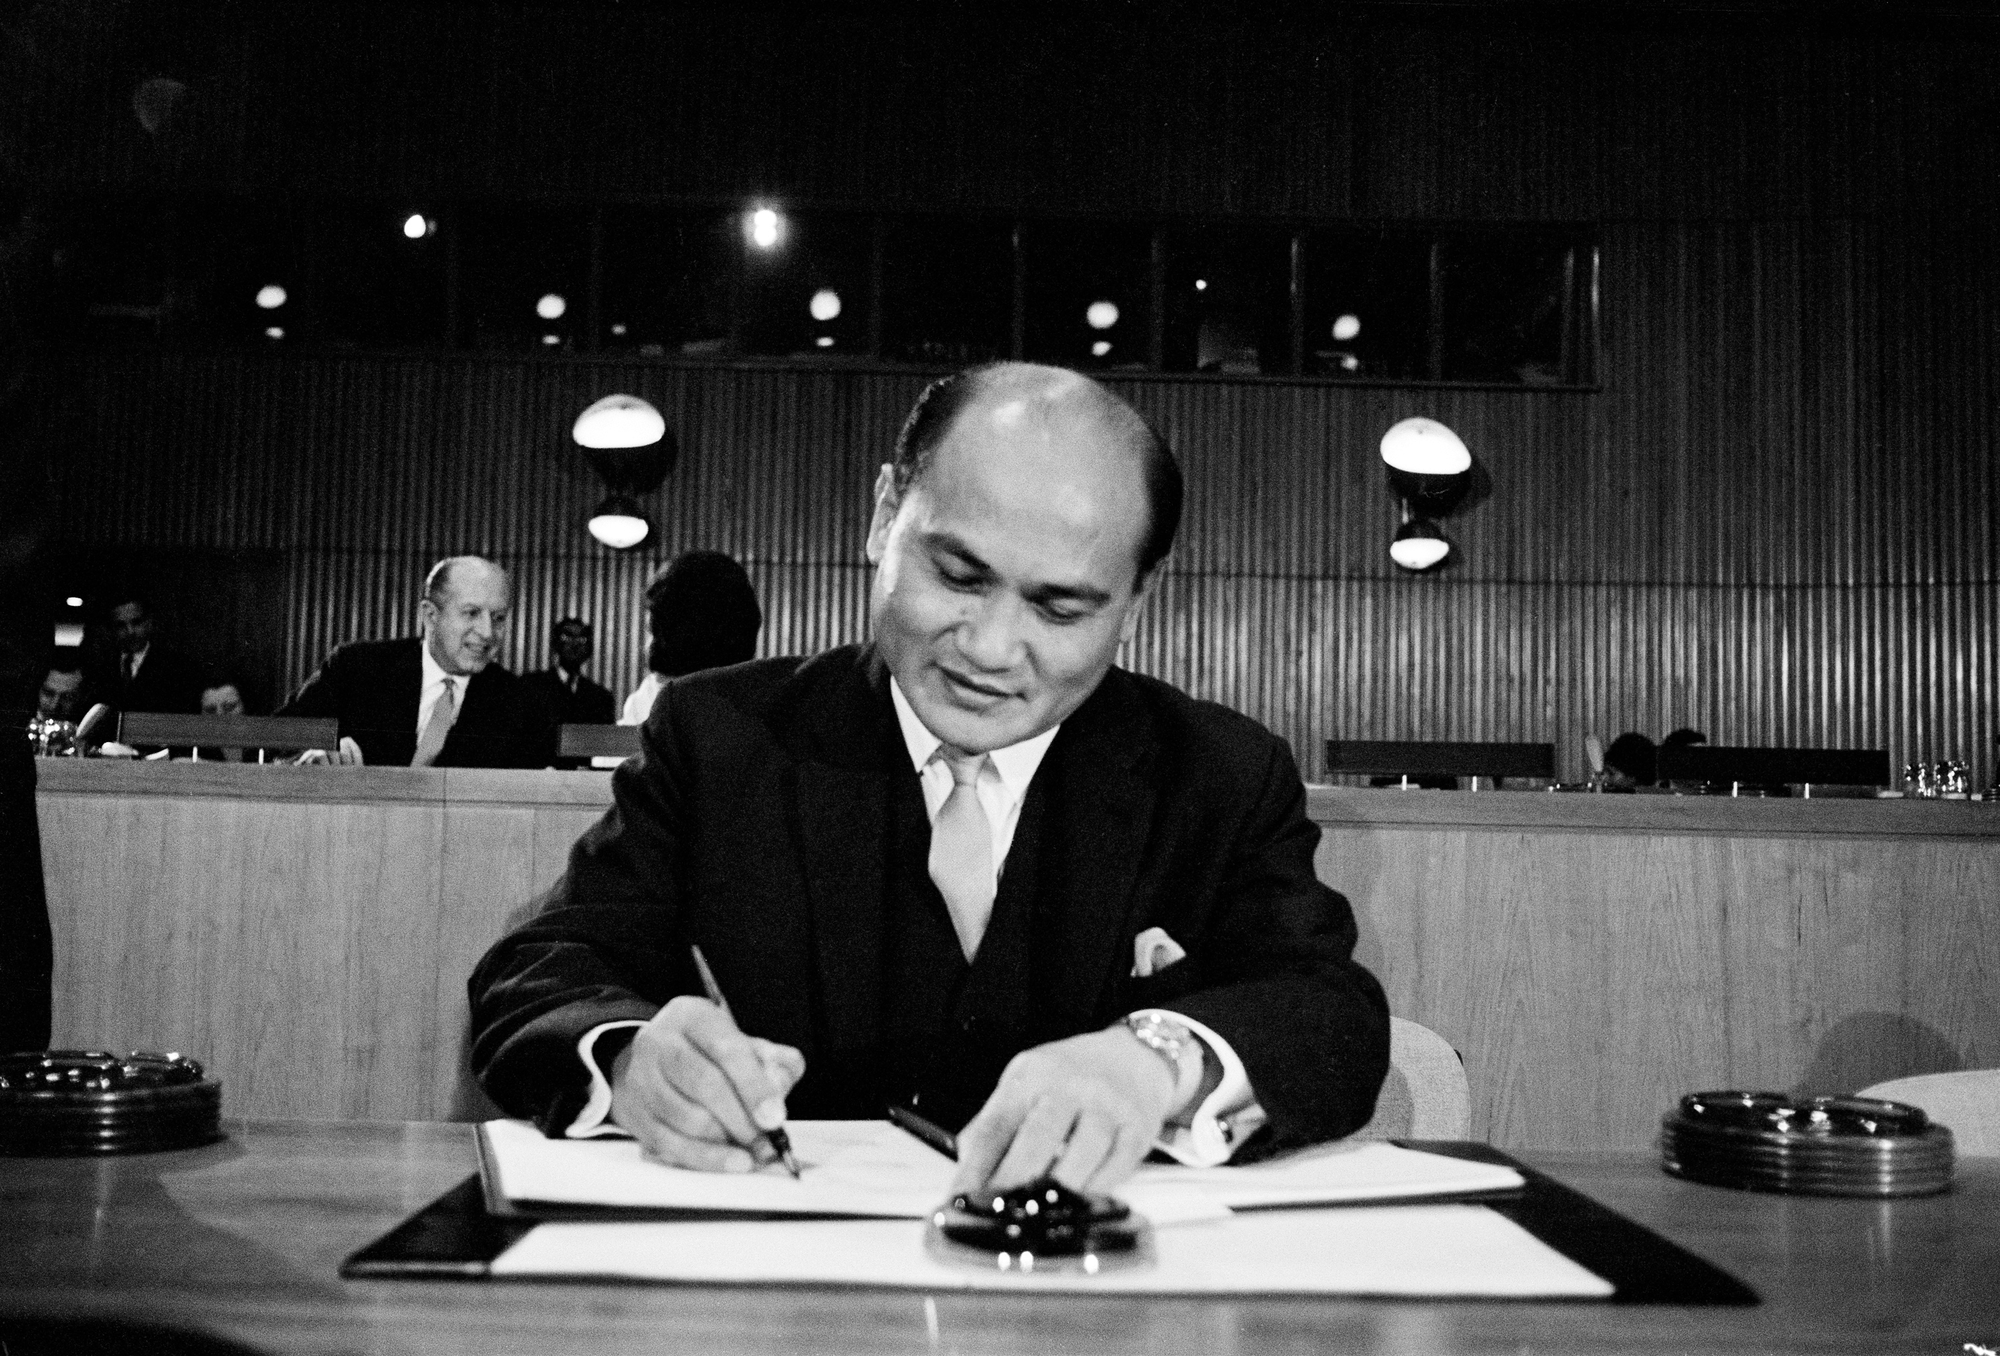 Ambassador Salvador P. Lopez (Philippines) is seen signing the Covenants.